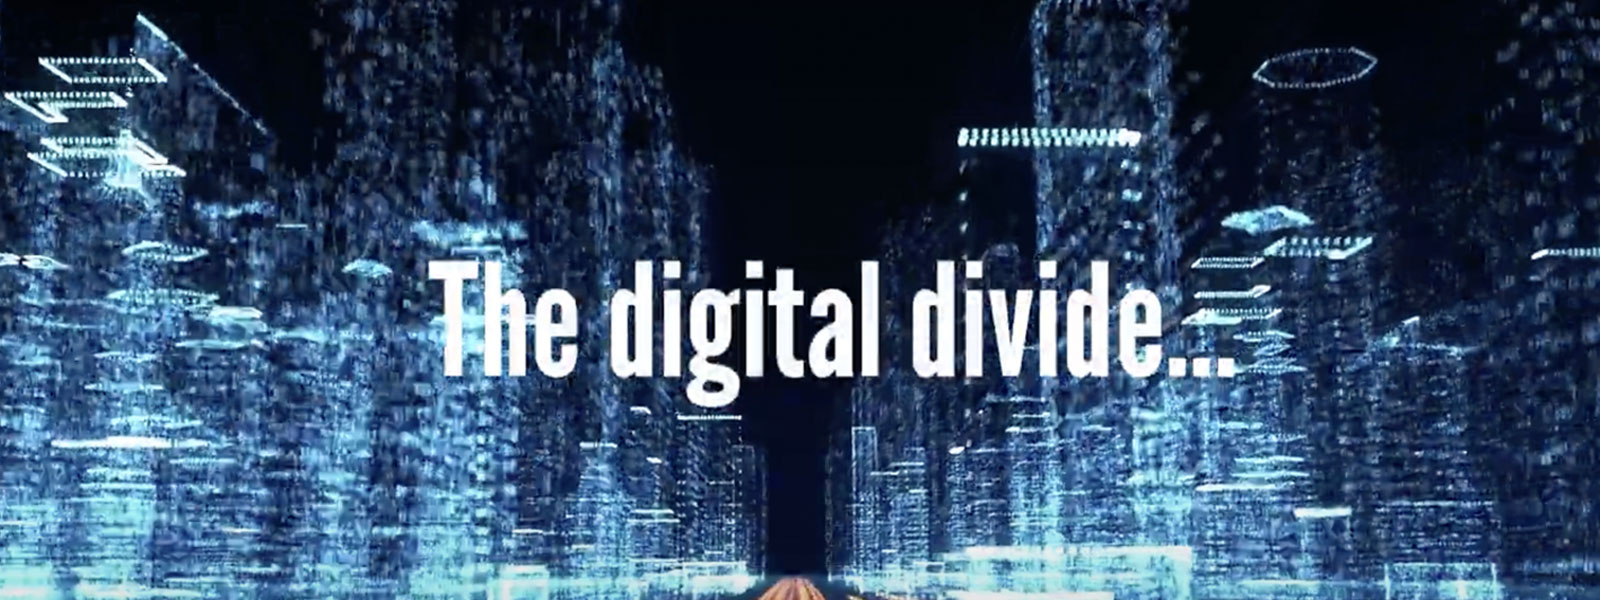 computer image with words overlay saying  "the digital divide"